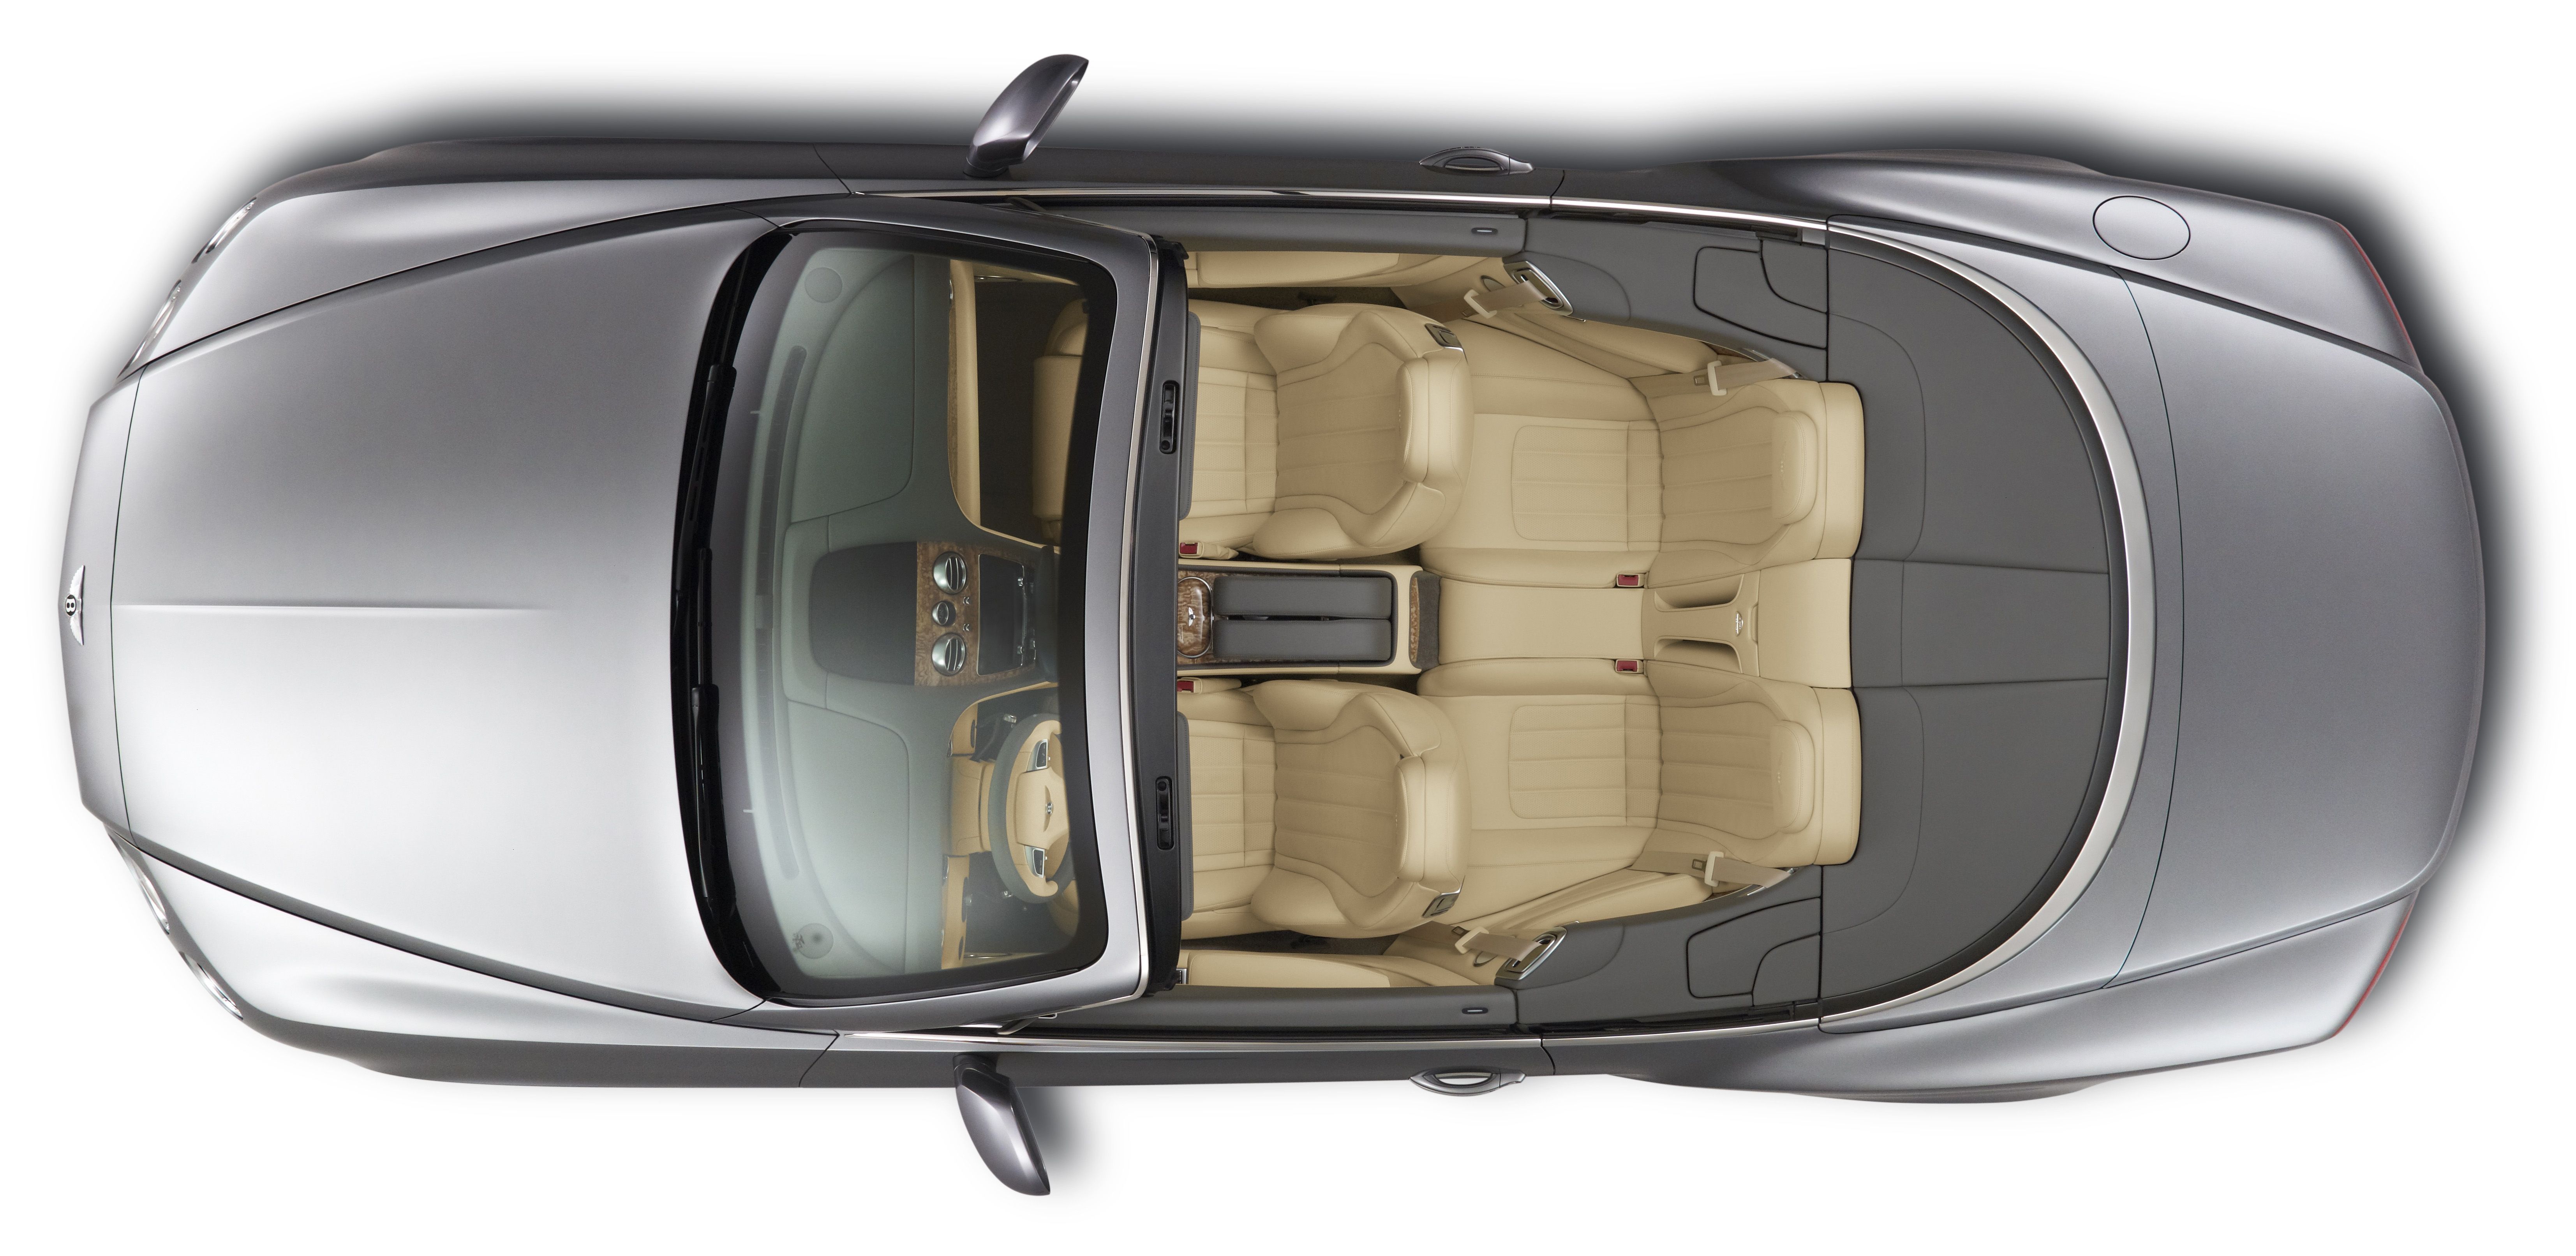 Top View Of A Car PNG - 167645